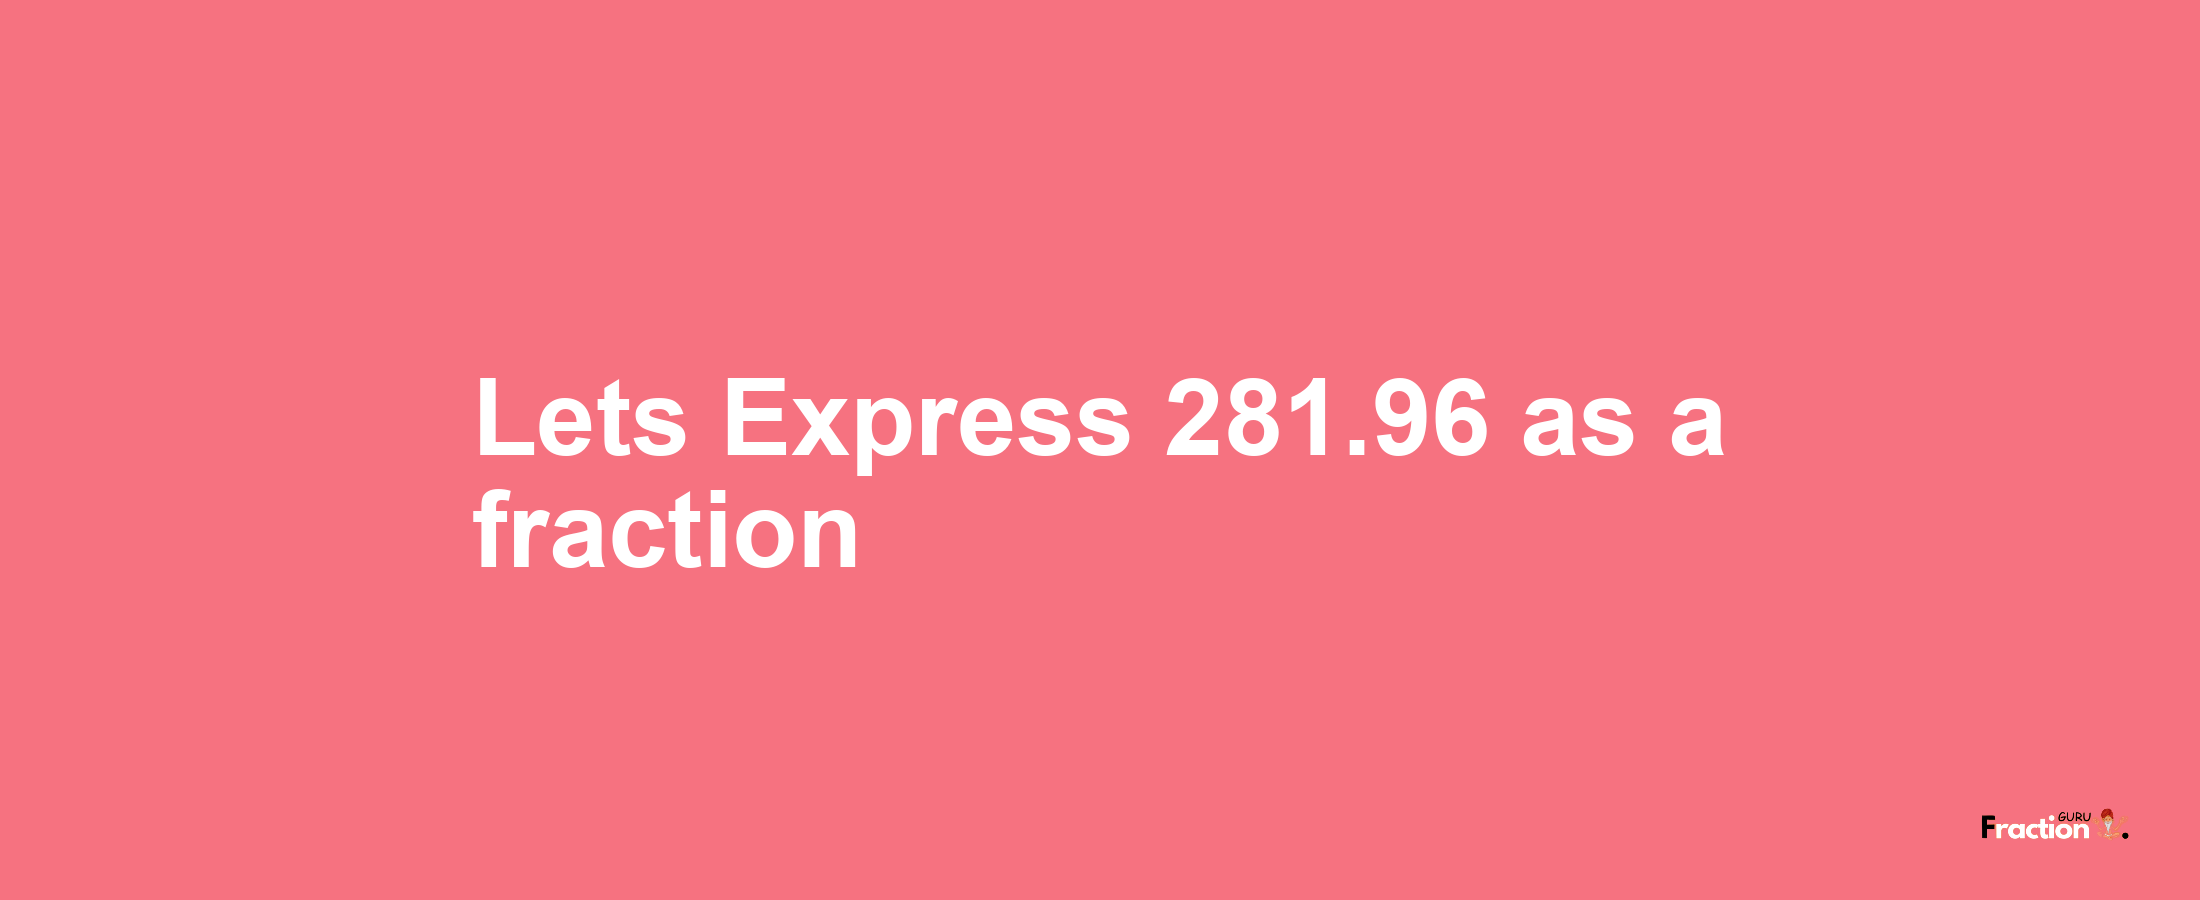 Lets Express 281.96 as afraction